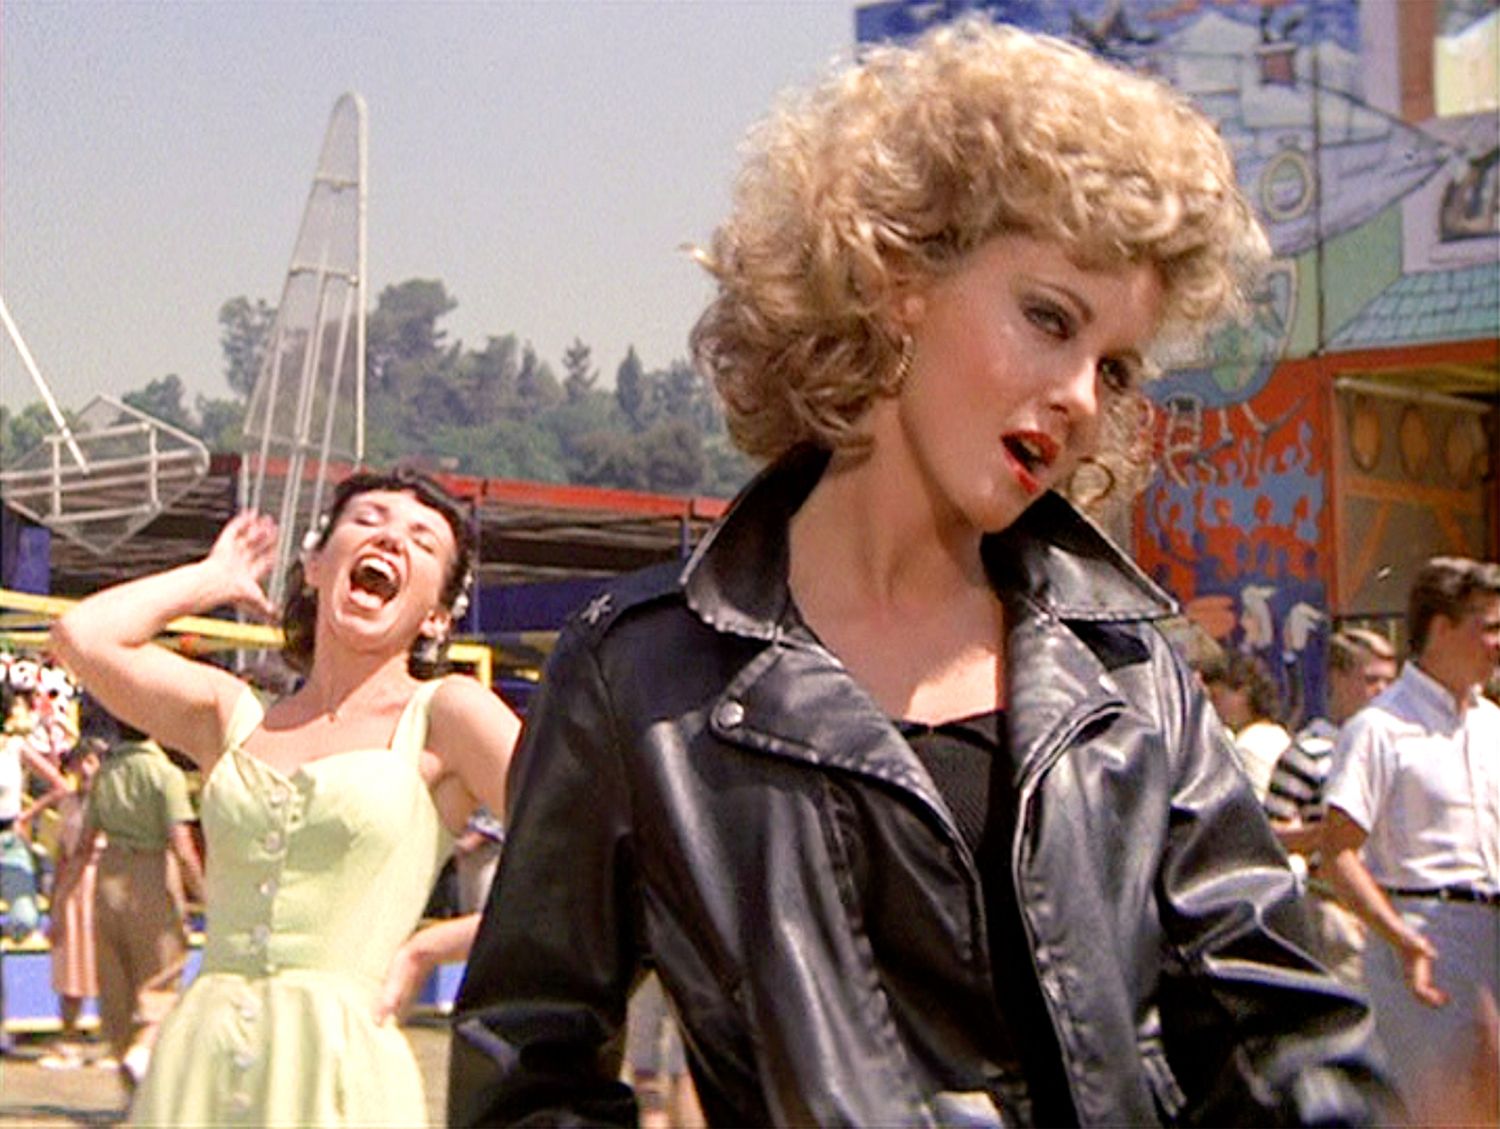 https://hips.hearstapps.com/hmg-prod/images/grease-outfit1-1612169319.jpg